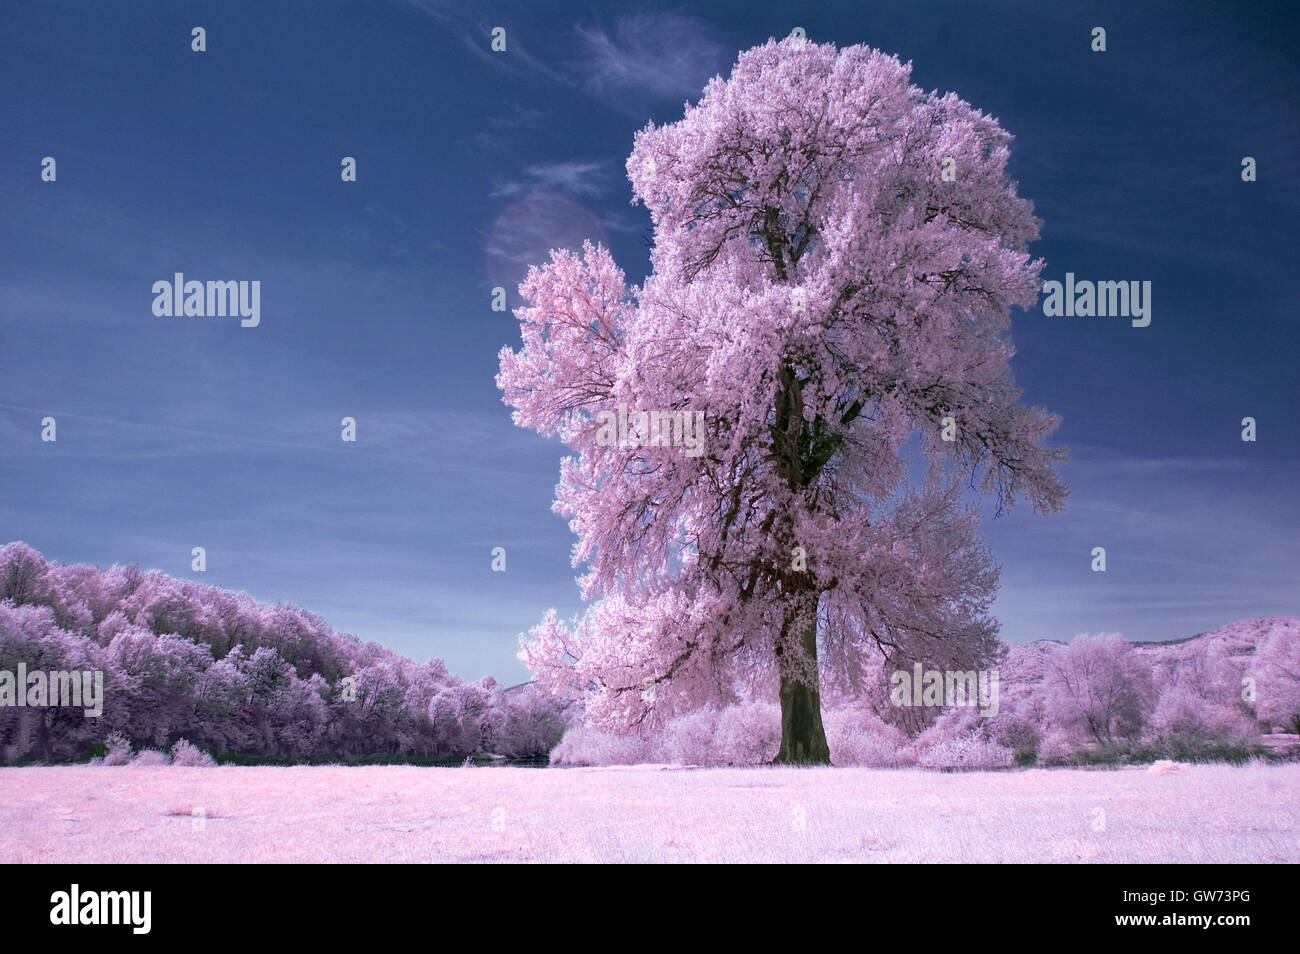 infrared landscape with old tree Stock Photo